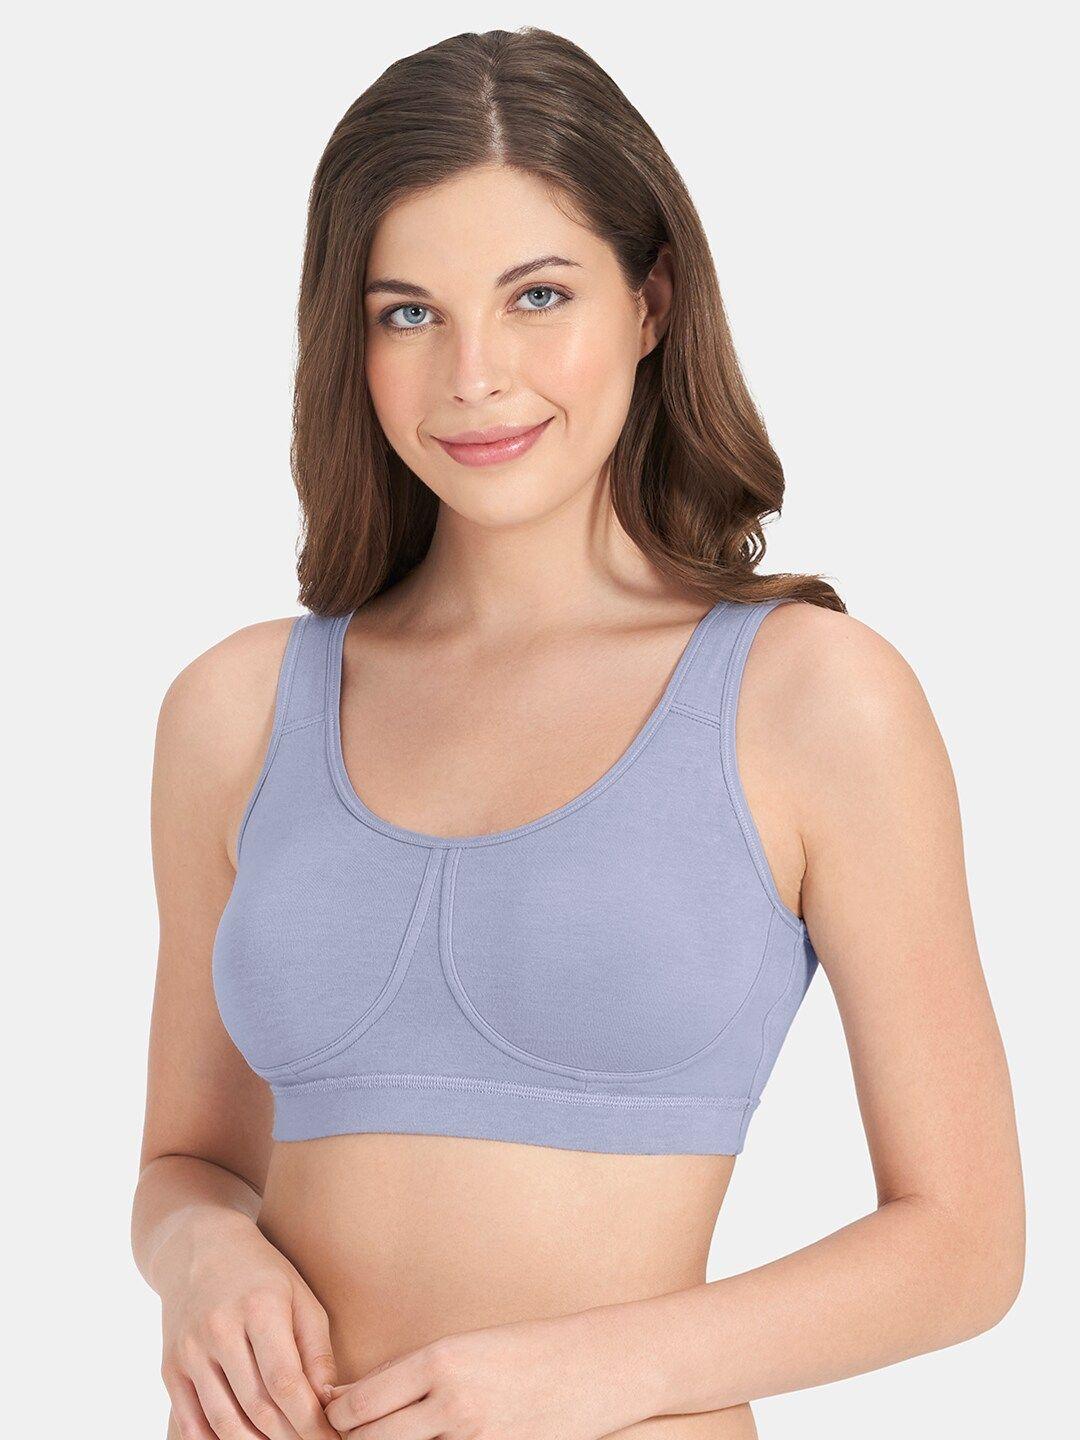 Amante Blue Solid Non-Padded Non-Wired Full Coverage Sleep Bra - BRA78901